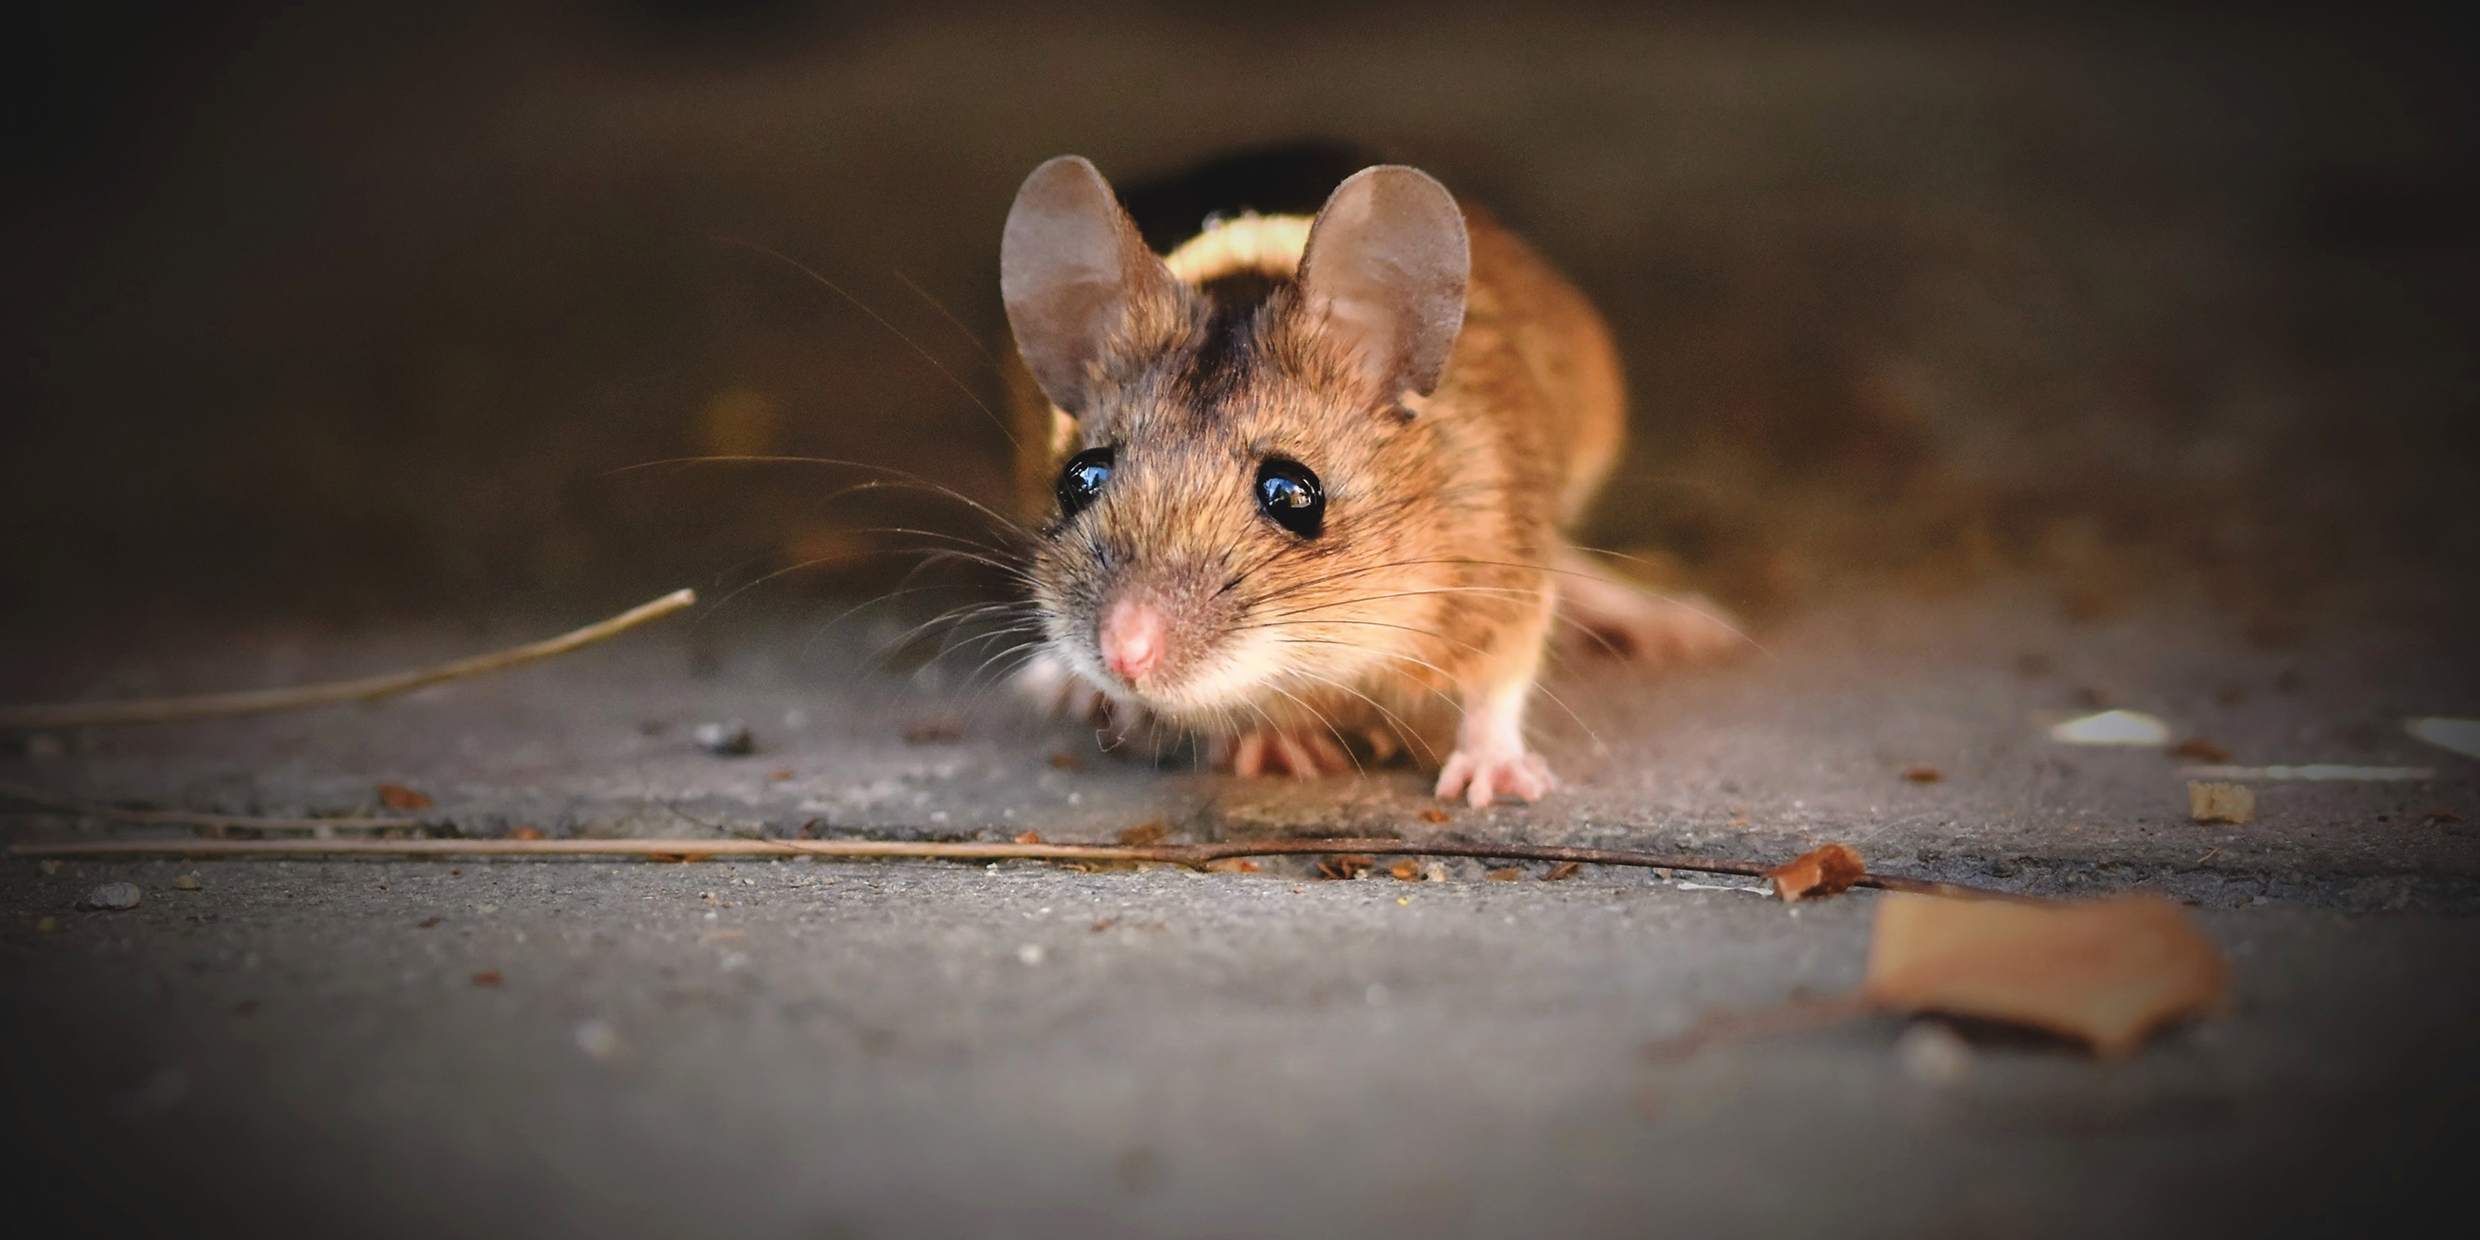 Image of a brown mouse